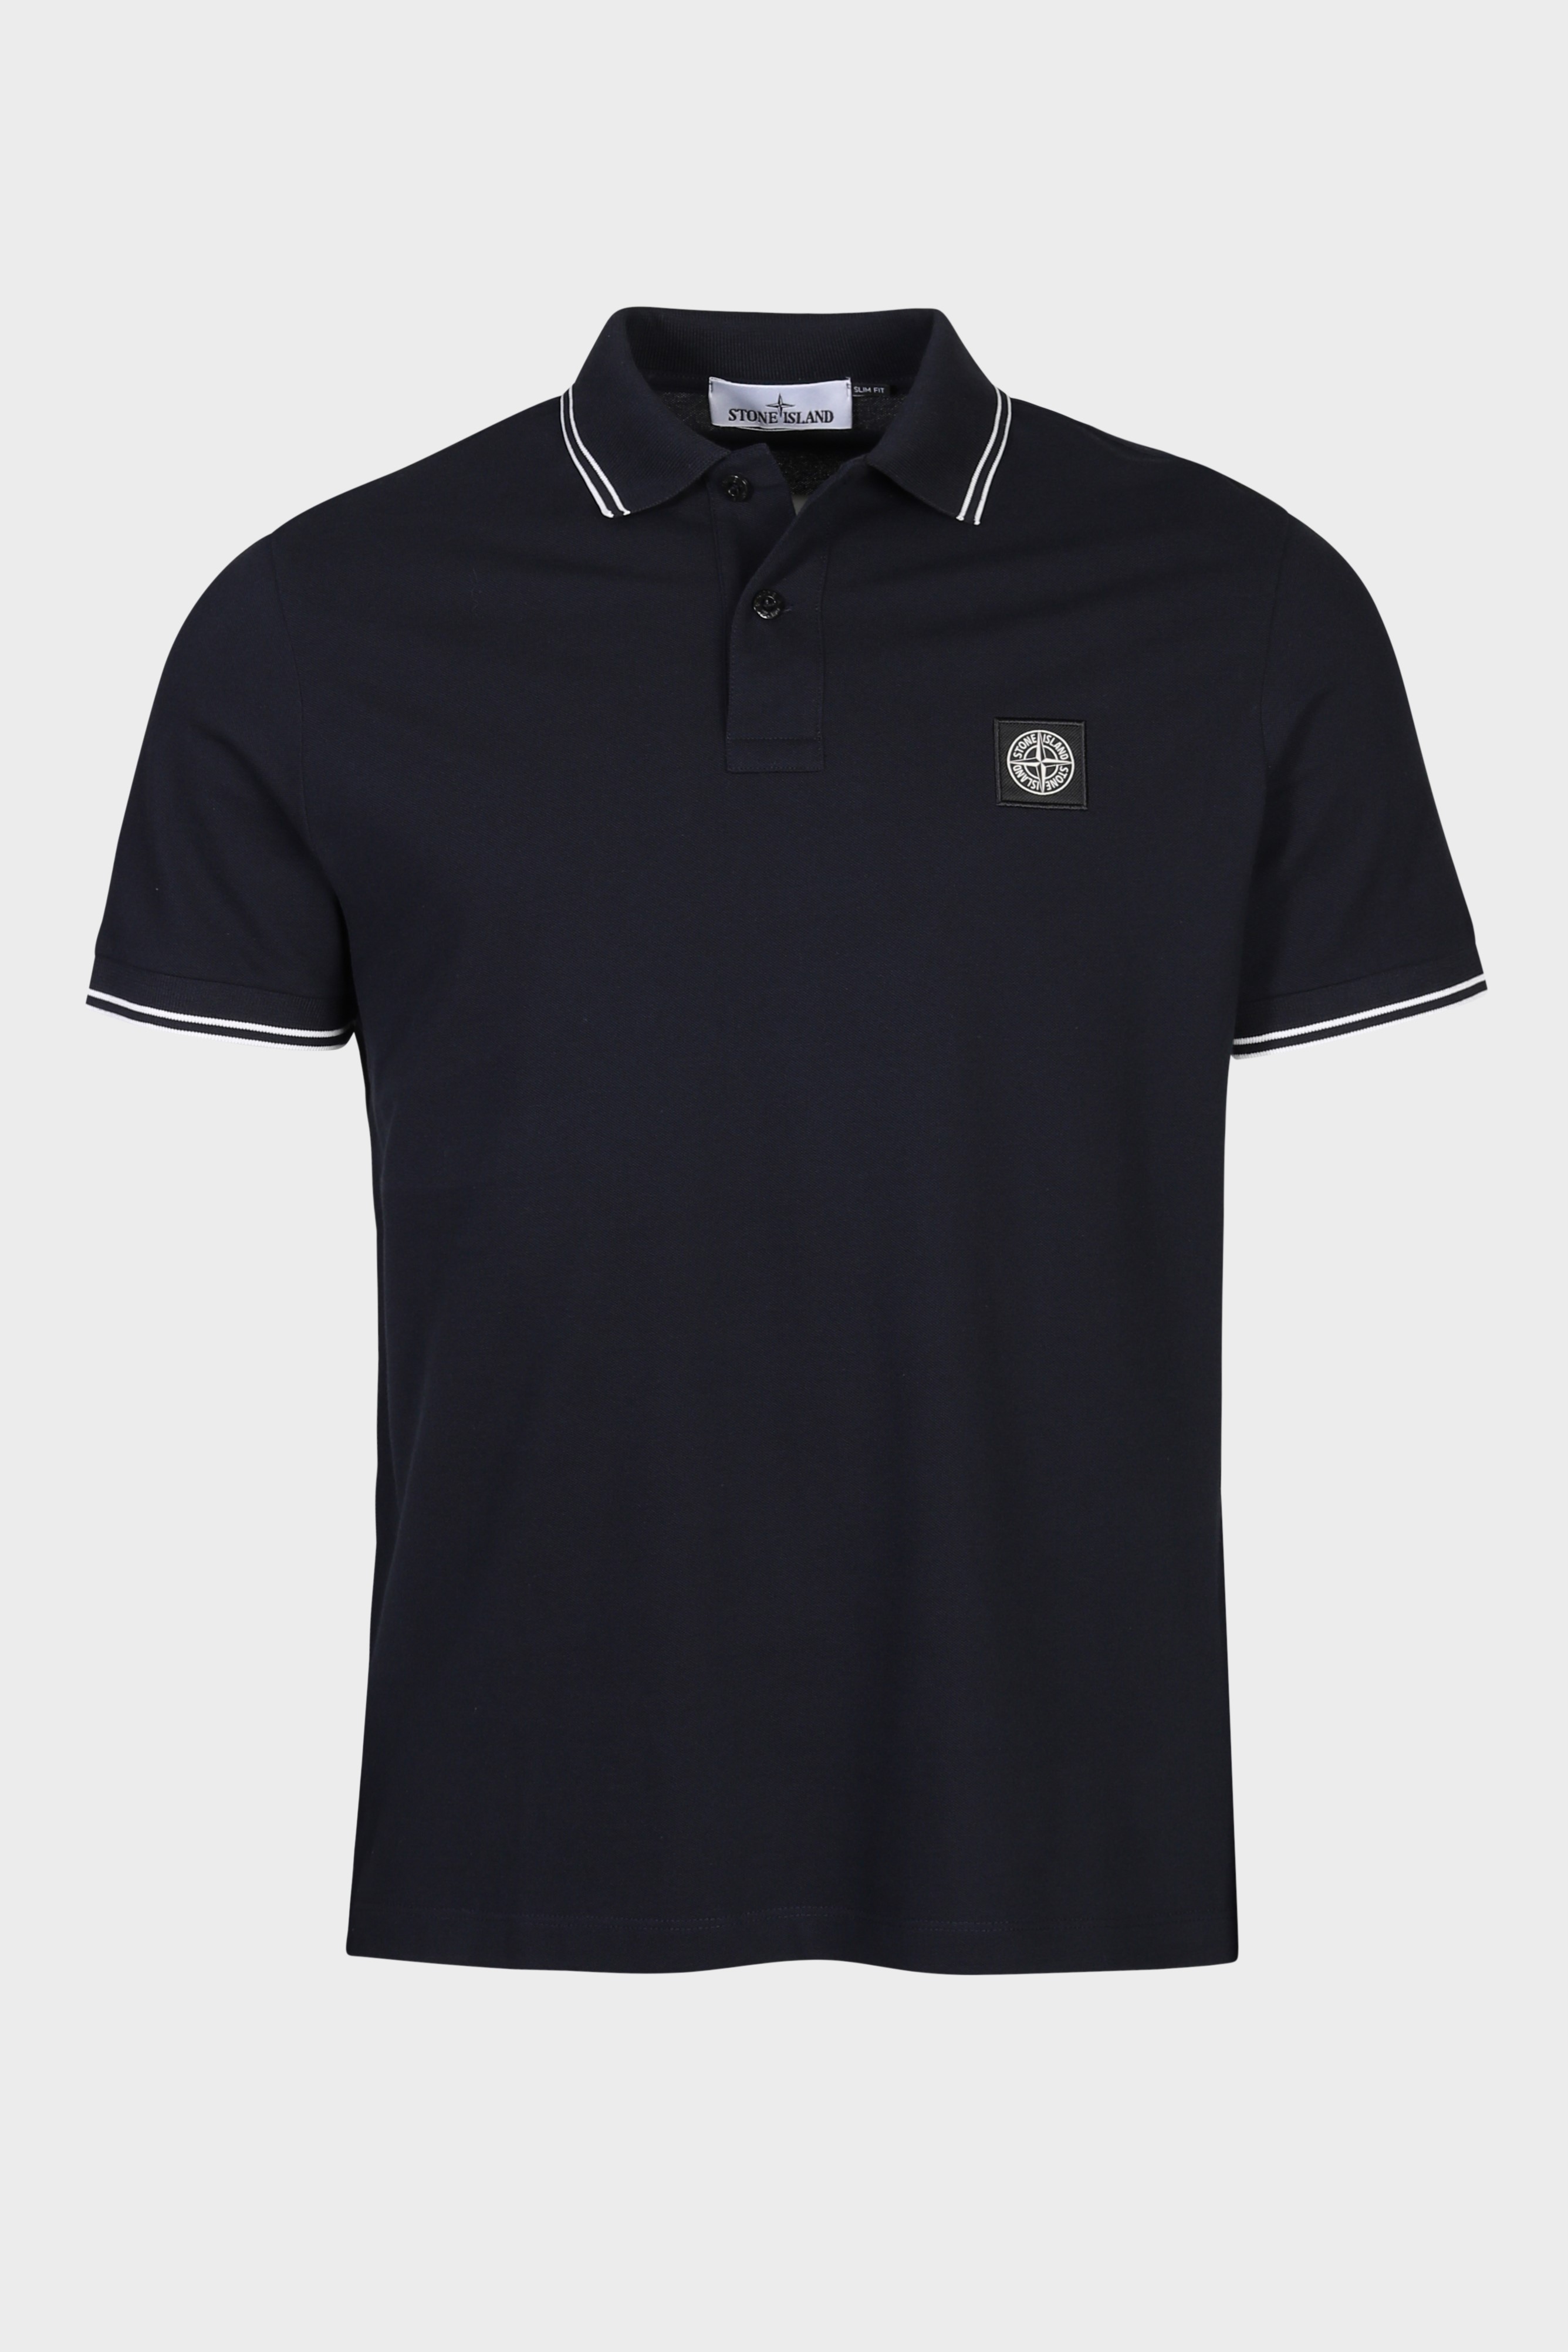 STONE ISLAND Slim Fit Polo Shirt in Navy